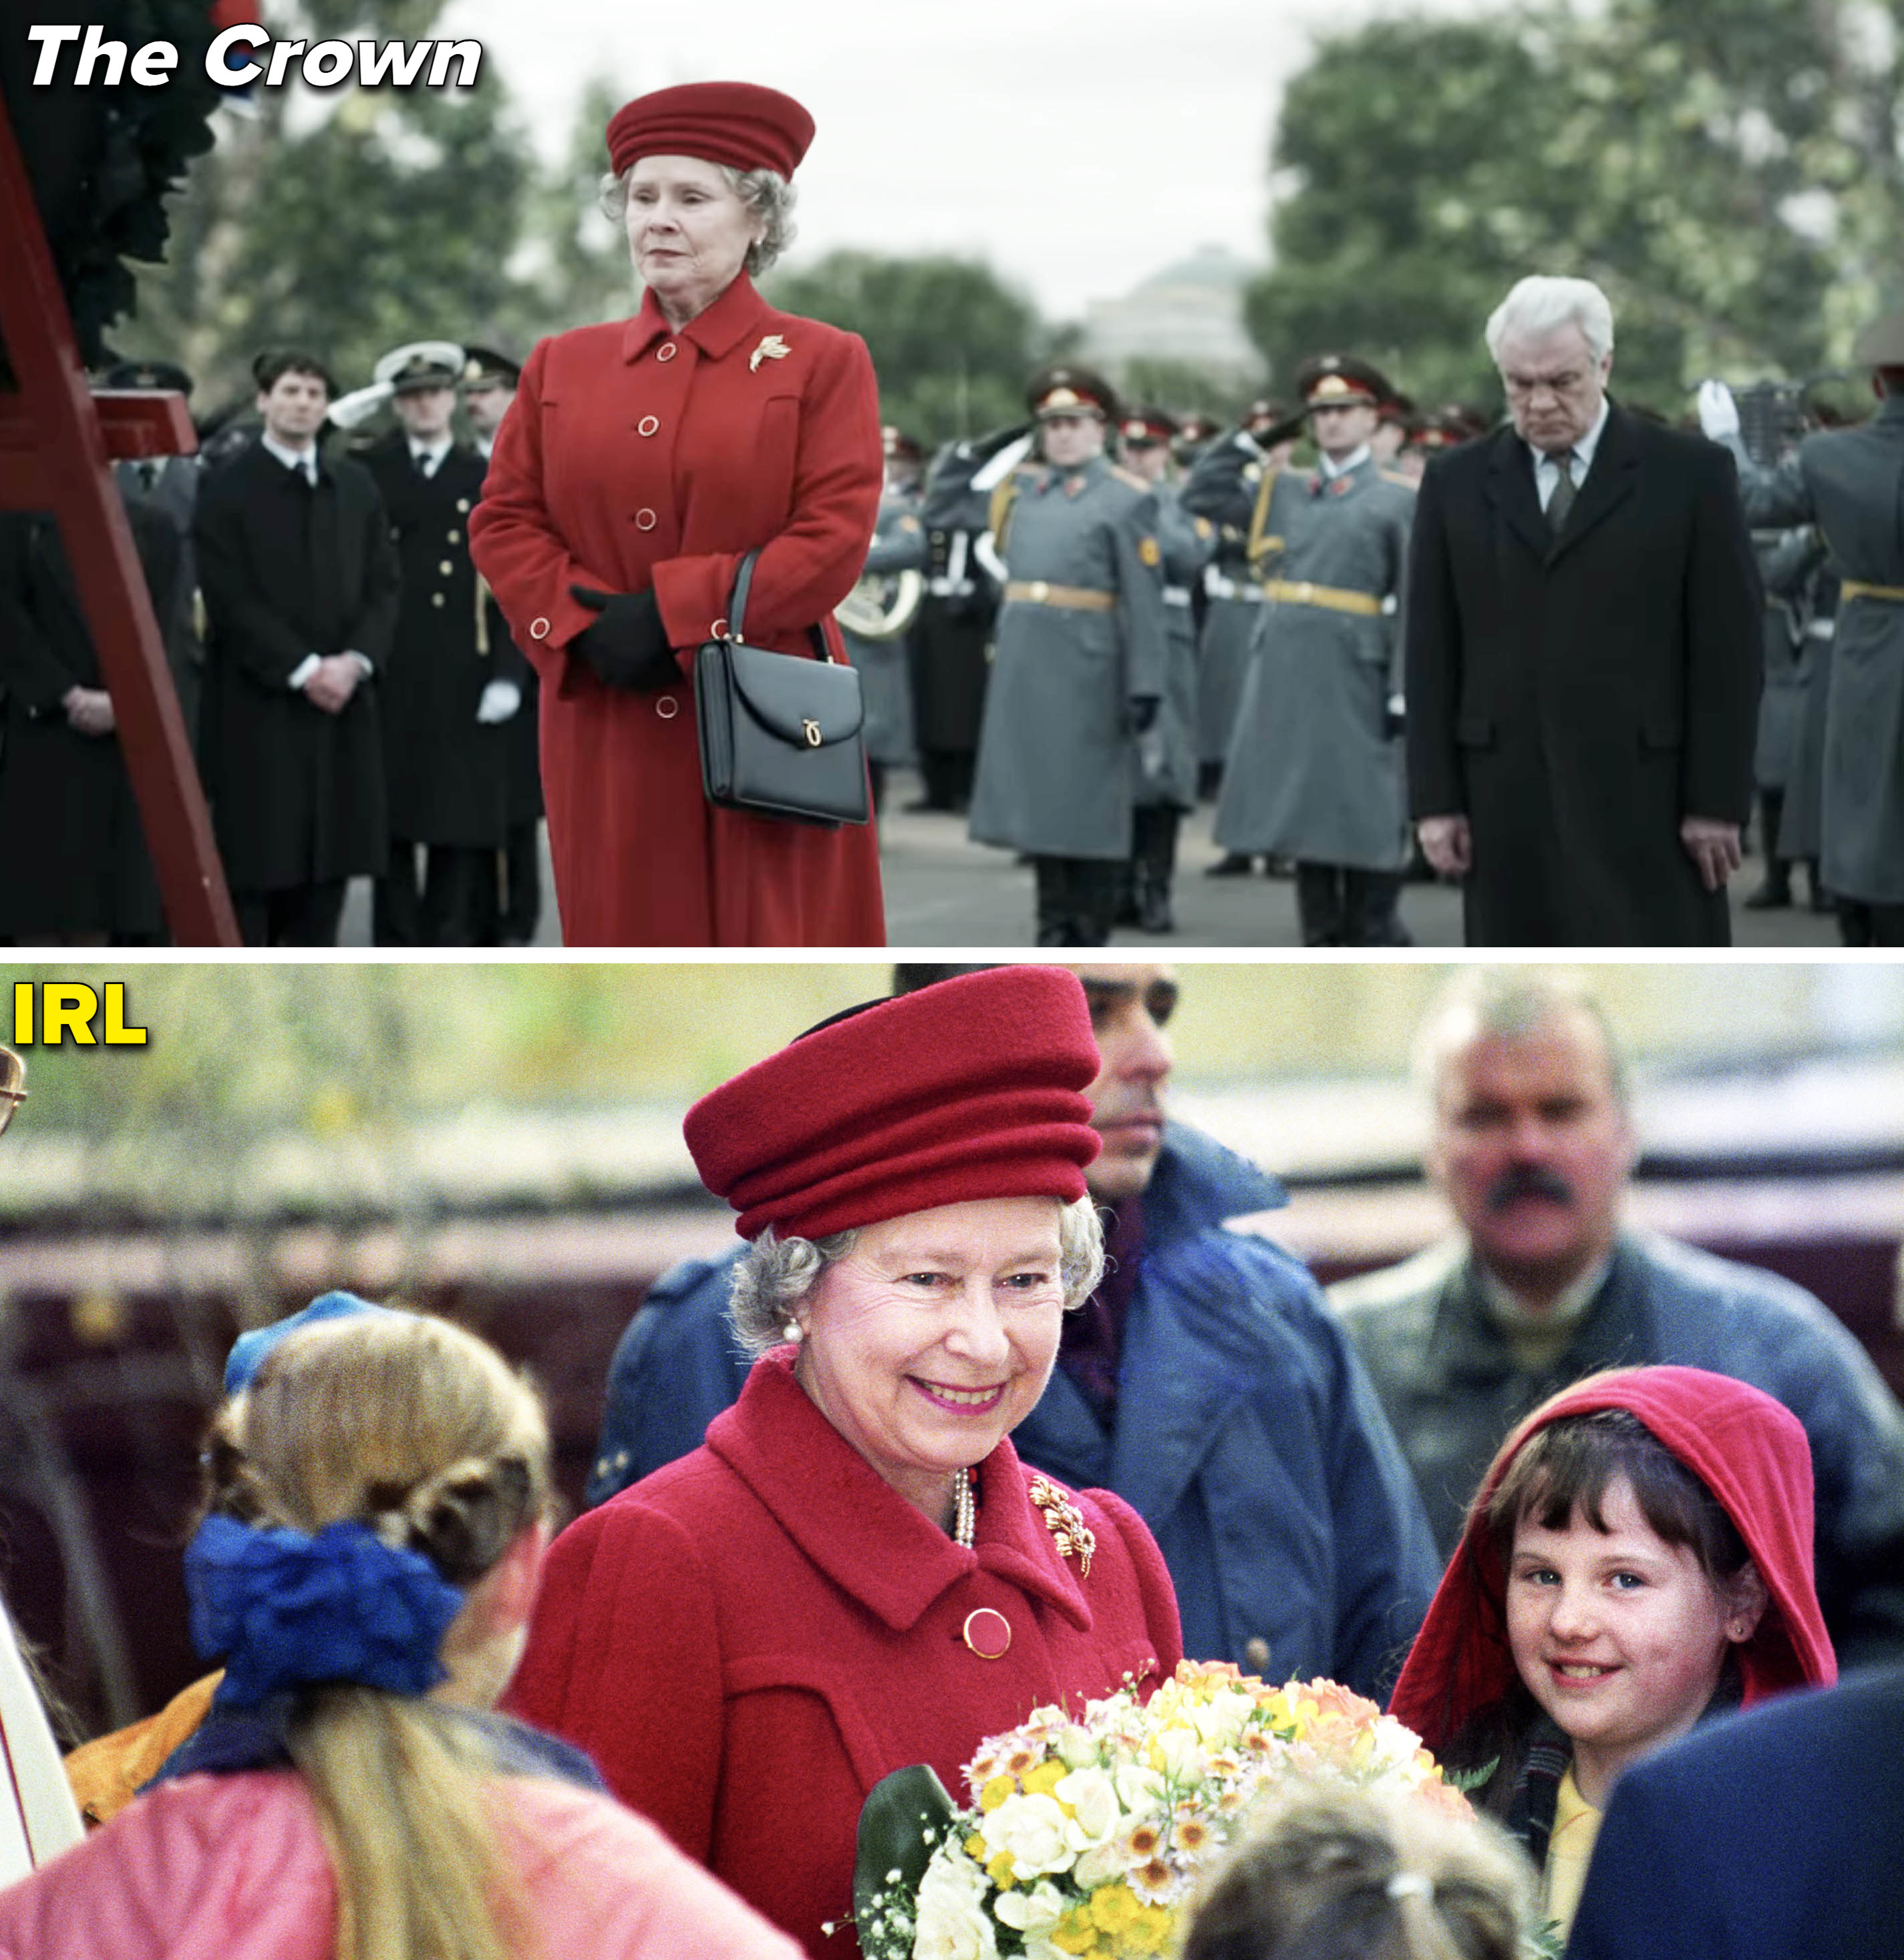 How 'The Crown' Season 5 Nailed Queen Elizabeth II's Most Subtle Mannerisms